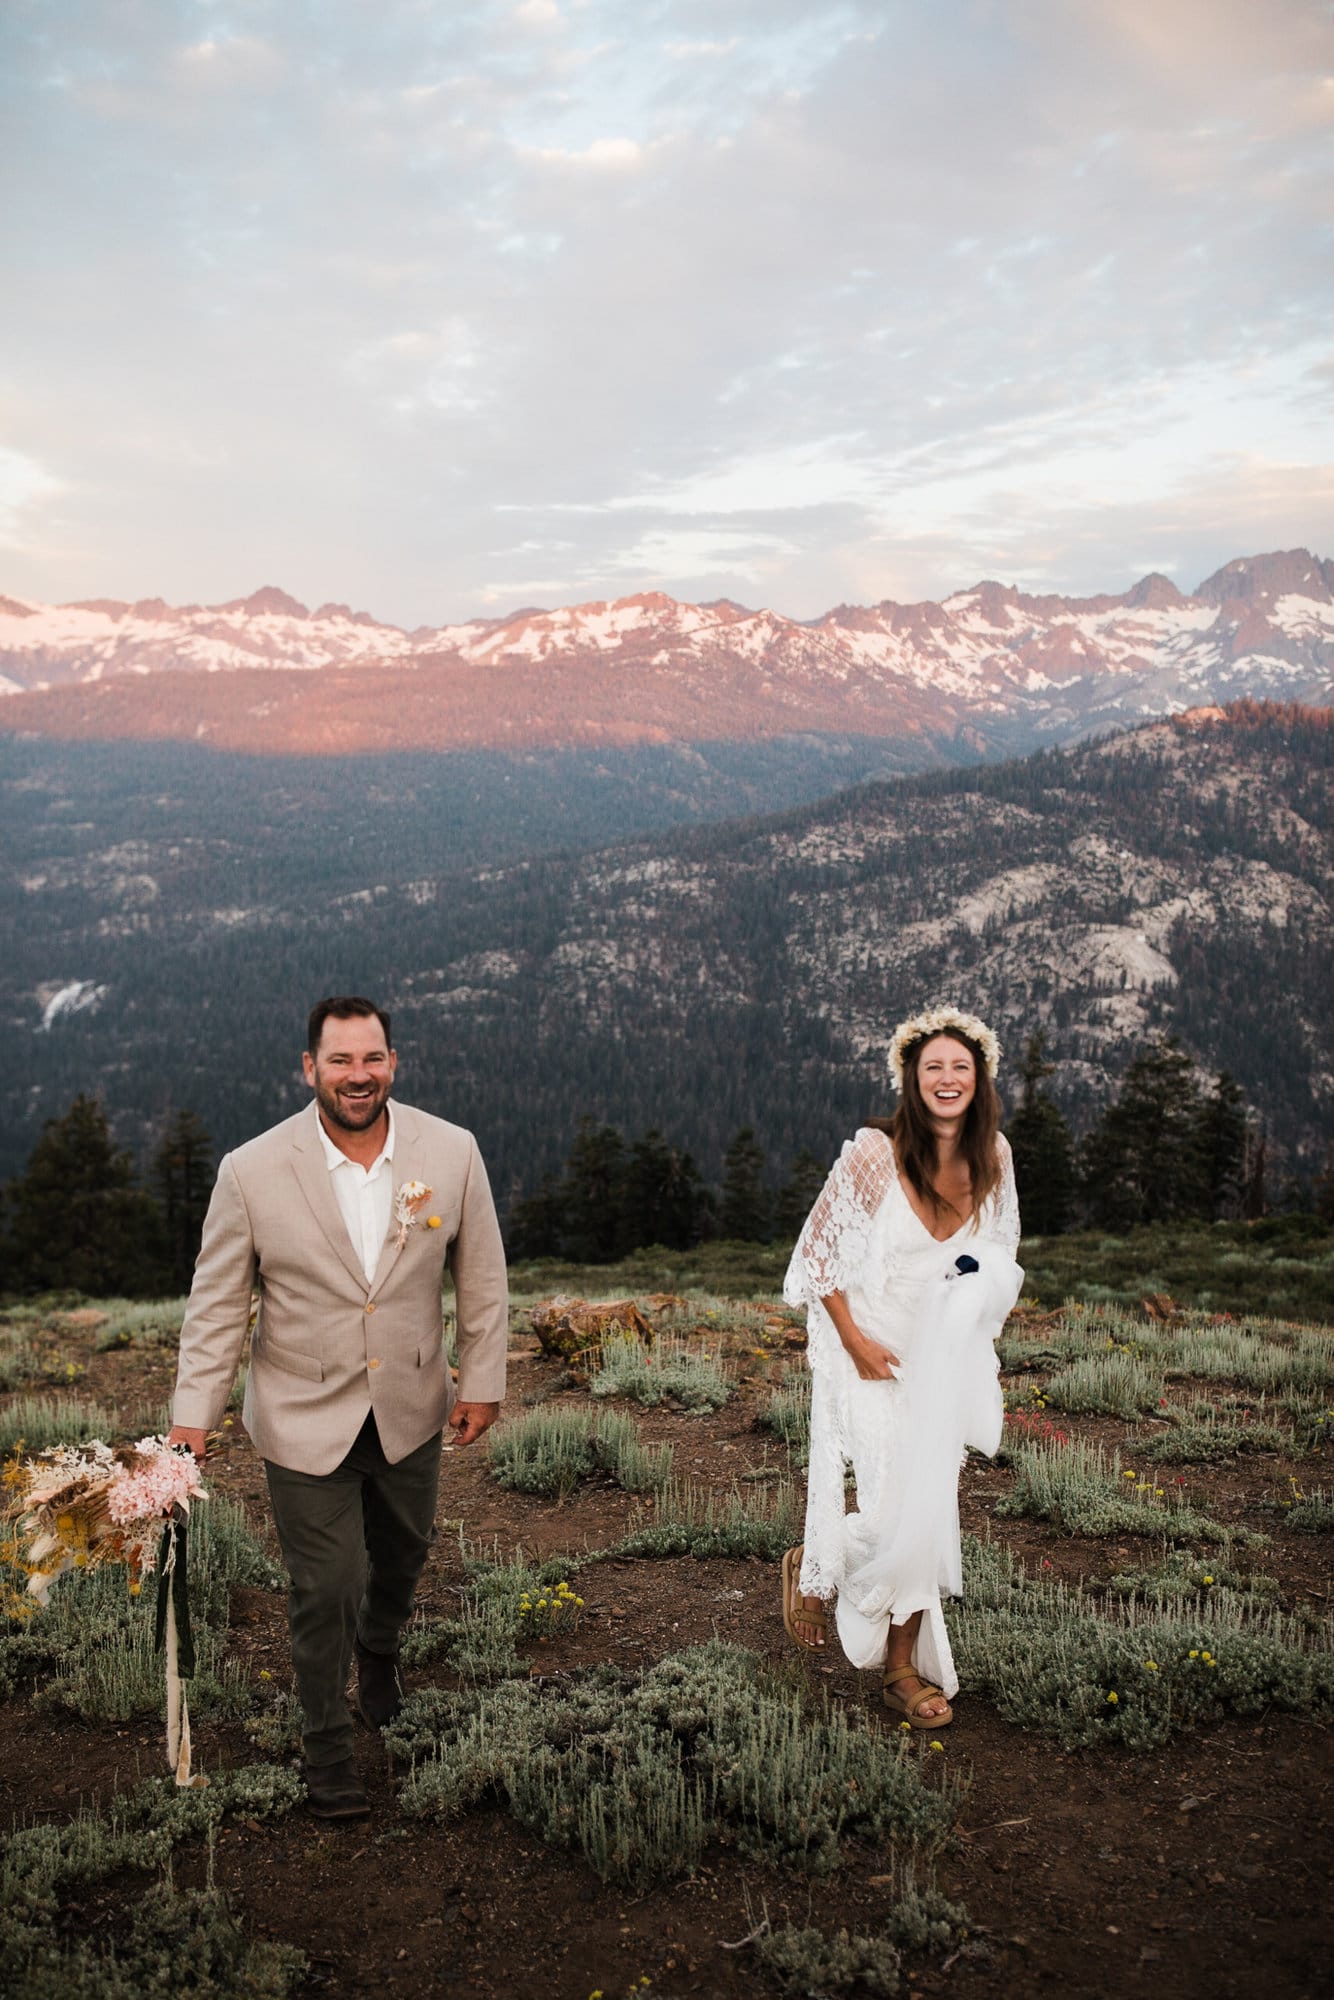 Skiing in the summer doesn't always happen- but after a record breaking winter these two got the Mammoth Lakes elopement of their dreams.